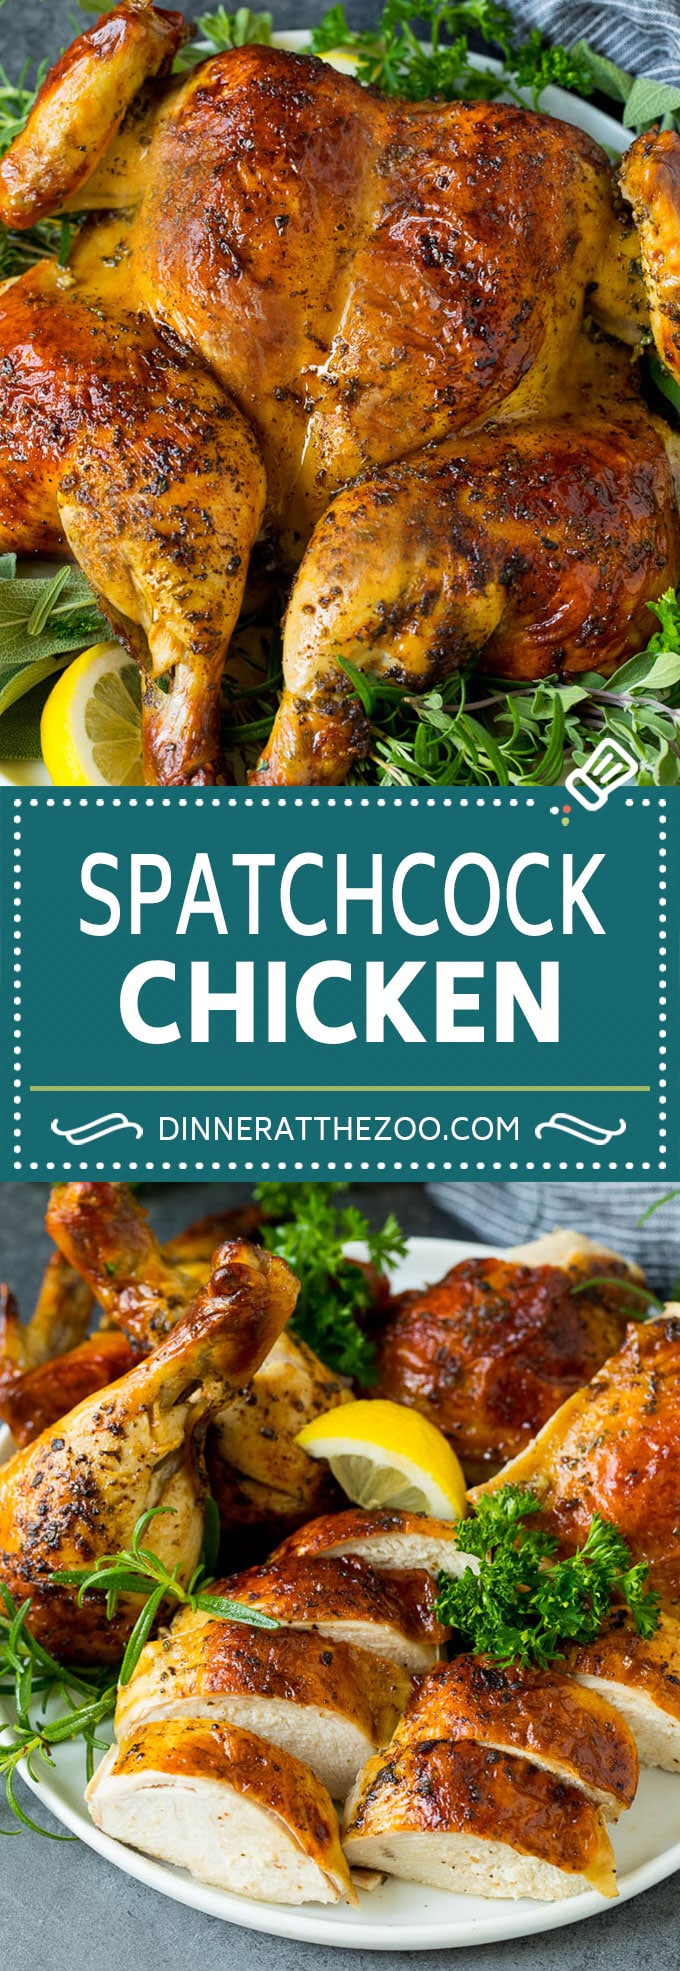 This spatchcock chicken is tender, juicy and cooks quickly, the perfect easy dinner!